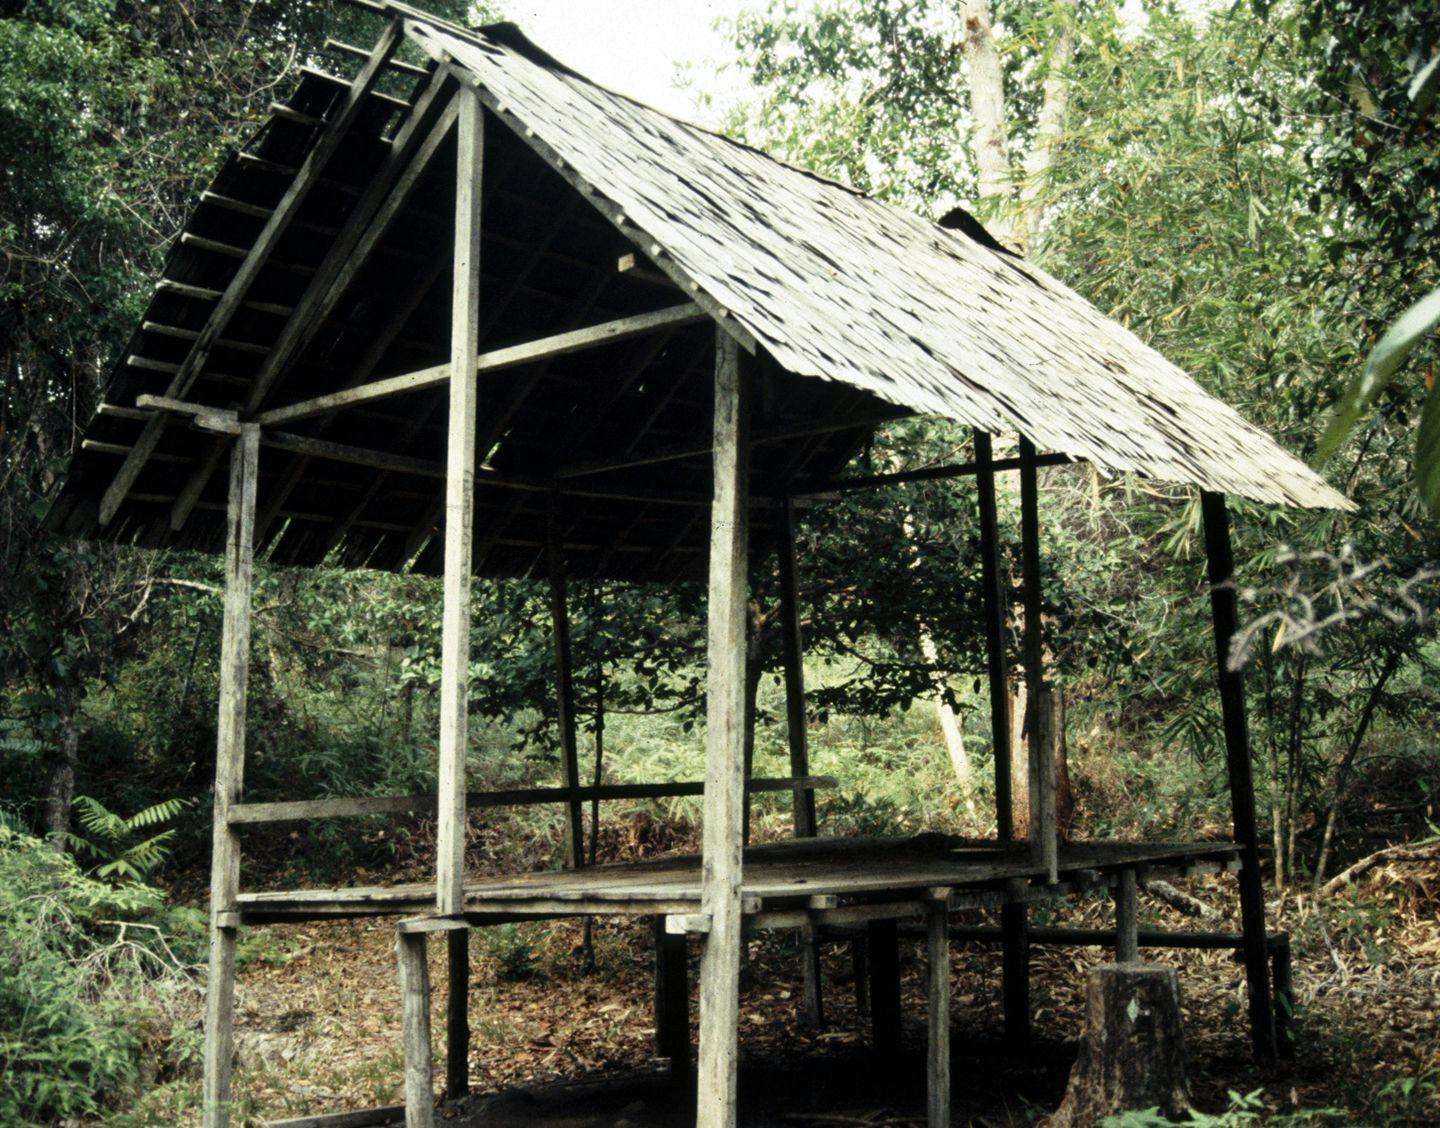 What started as just this hut built by Brindamour eventually became a village of wooden structures for staff, researchers, students, and park rangers.